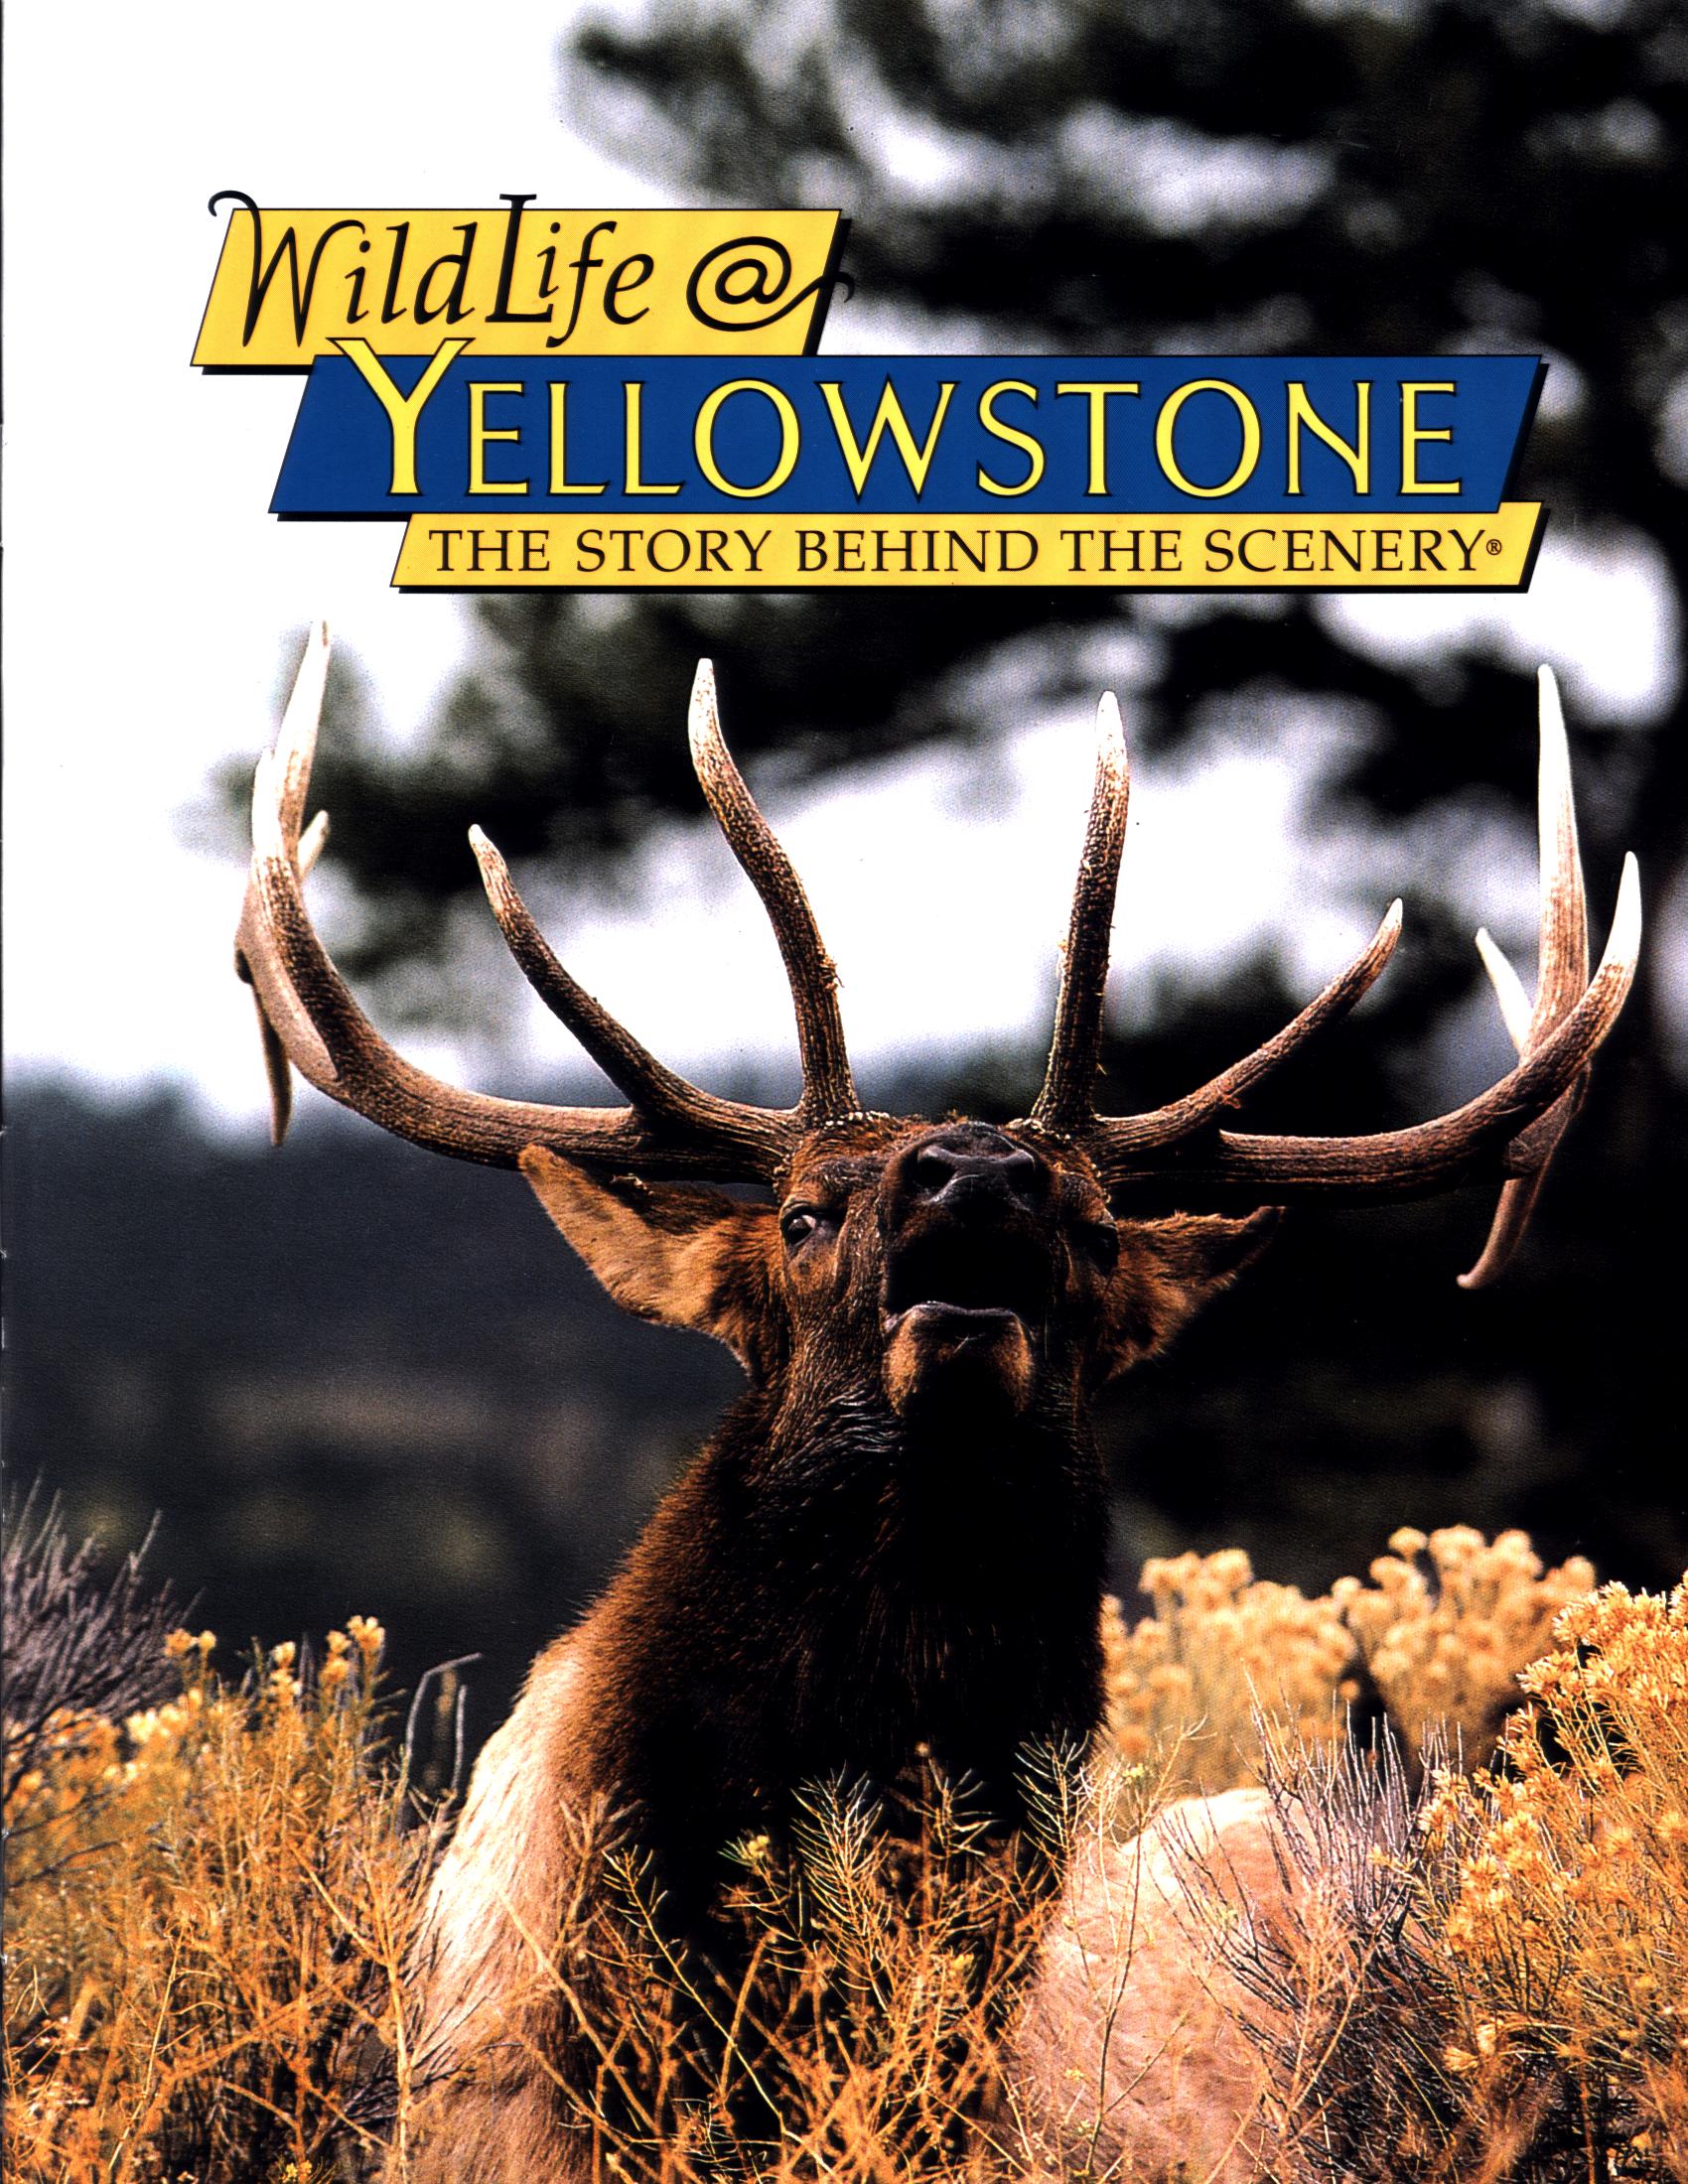 WILDLIFE @ YELLOWSTONE: the story behind the scenery (MT/WY/ID).